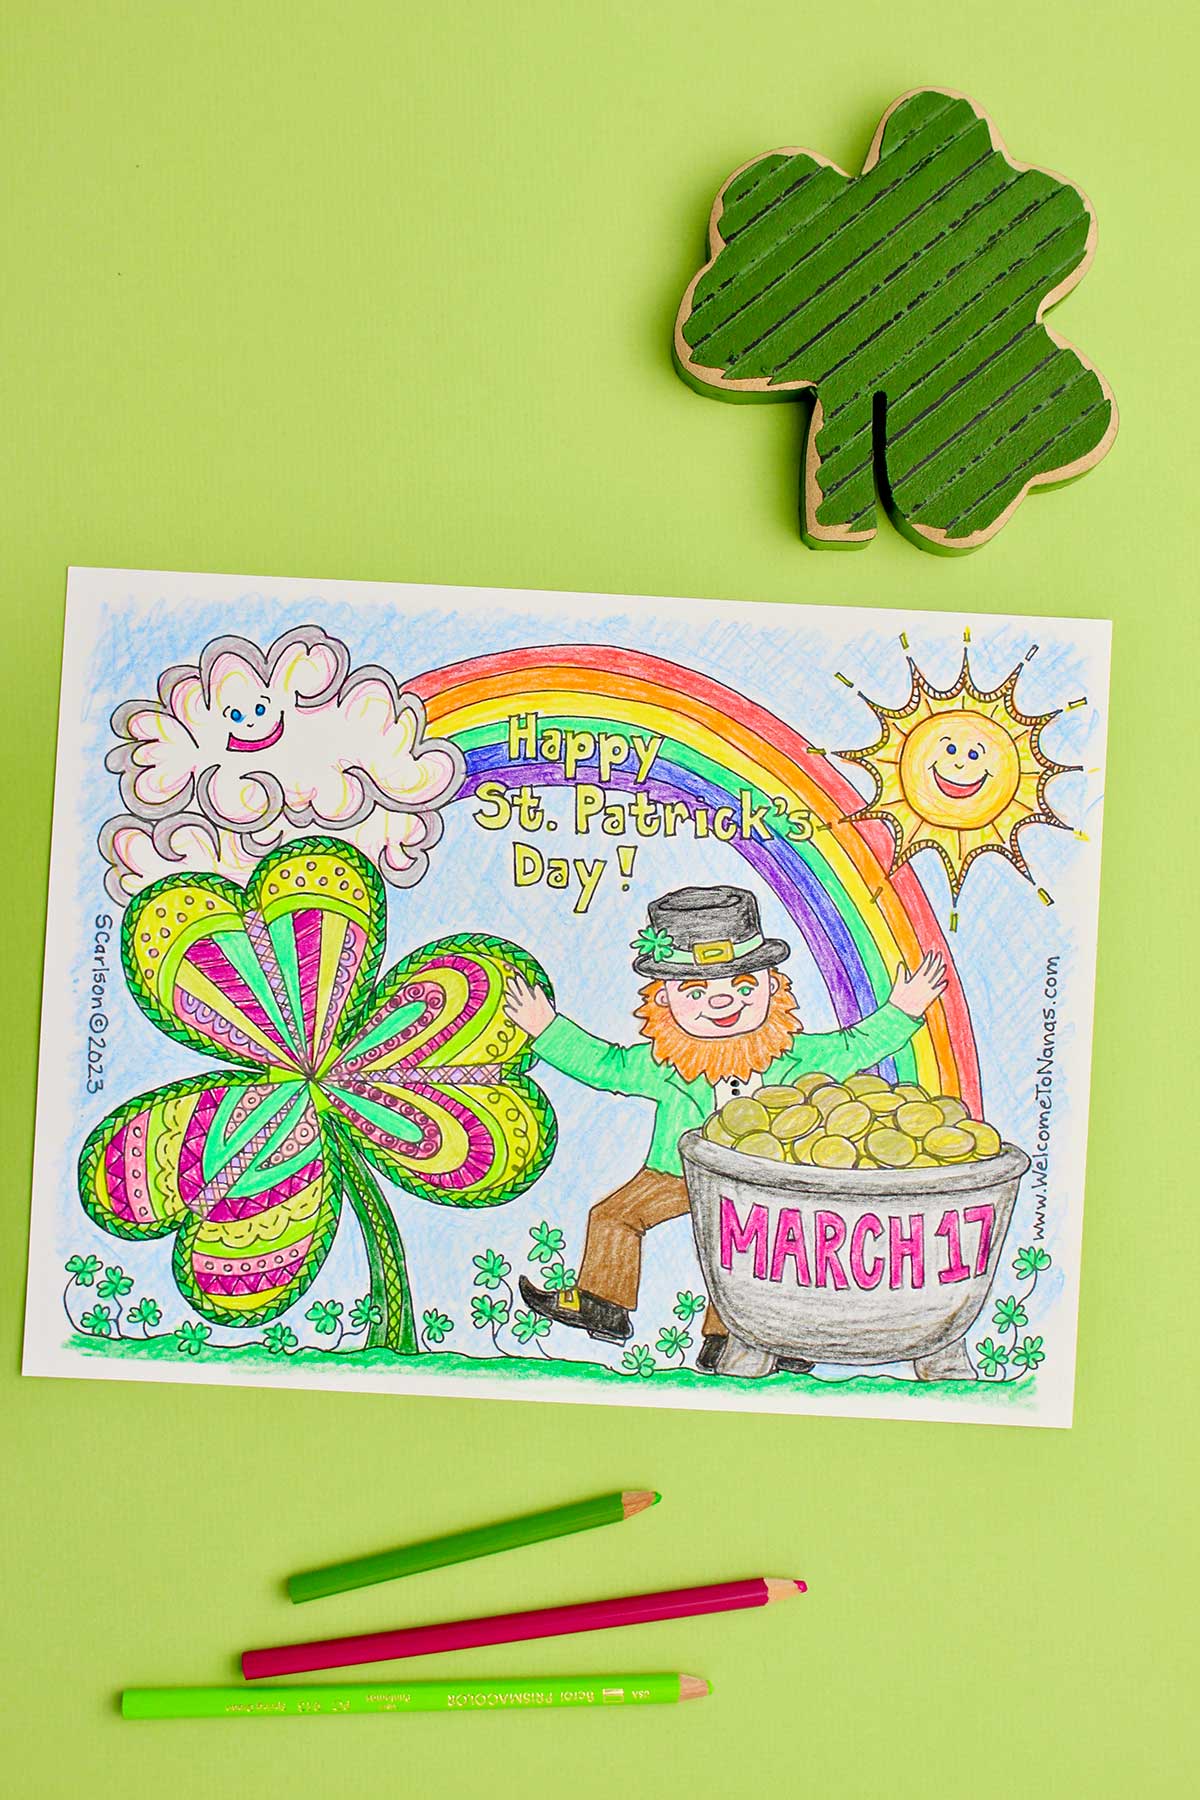 Vertical image of completed St. Patrick's Day coloring page against a lime green backdrop with three colored pencils and a wooden shamrock near by.